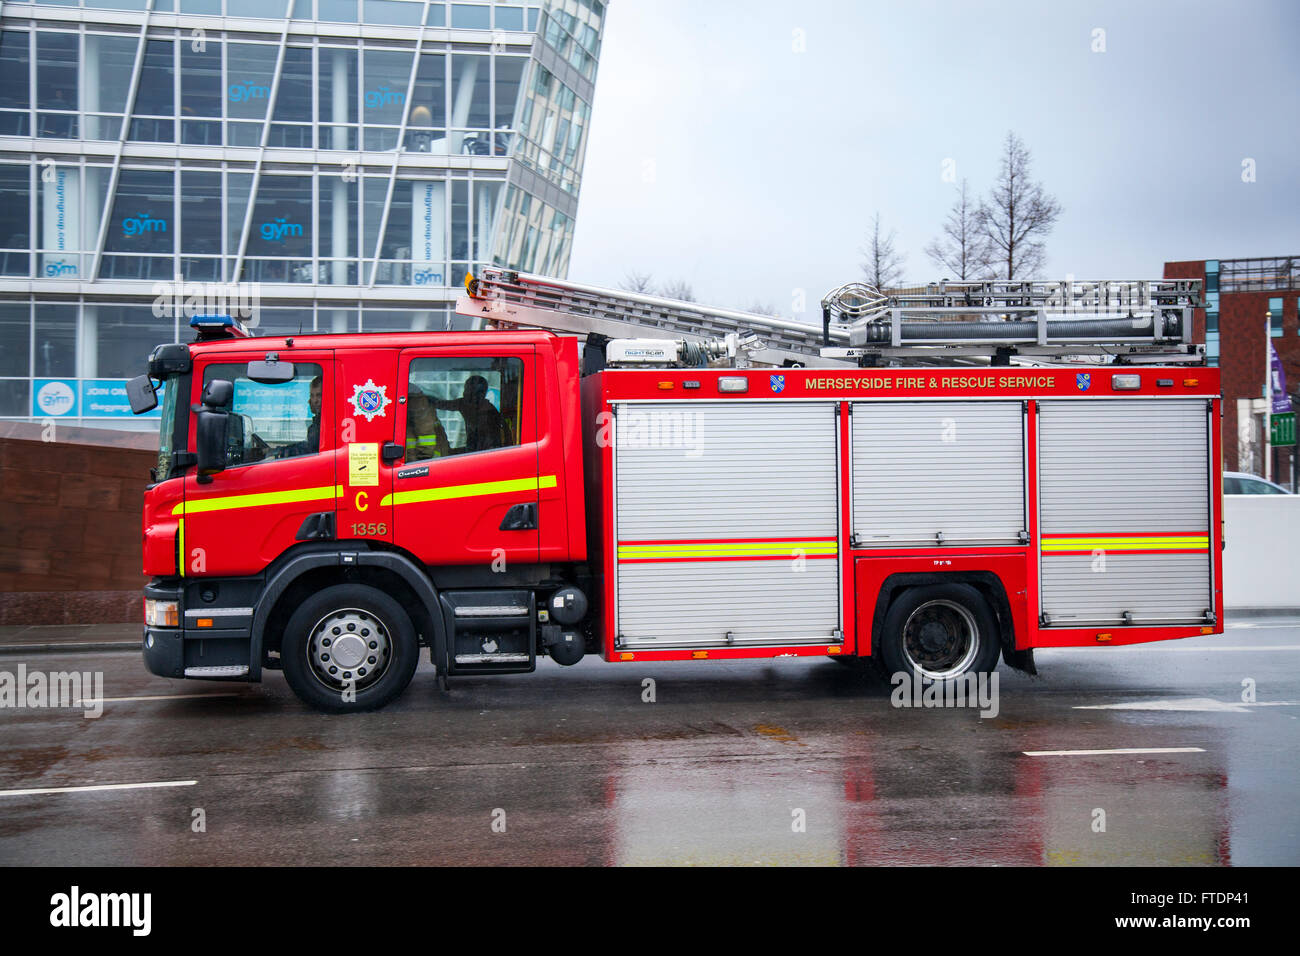 Merseyside Fire & Rescue, fire, truck, emergency stationery vehicle, rescue, car, firefighter, safety, engine, red, fire truck, transportation, equipment, transport, fireman, danger, department, service, firetruck responding to an emergency on The Strand, Liverpool, UK Stock Photo